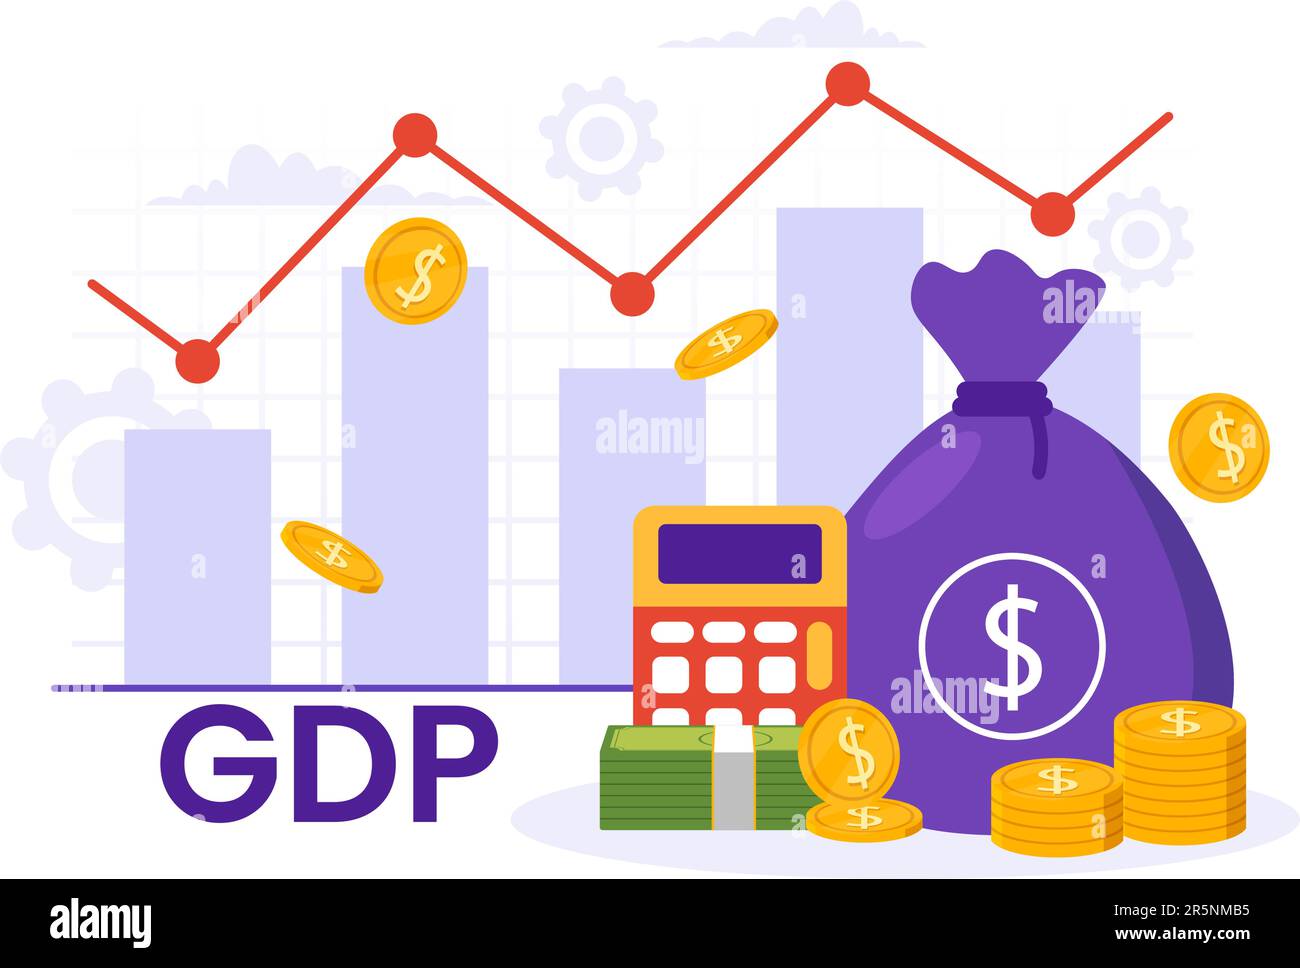 GDP or Gross Domestic Product Vector Illustration with Economic Growth Column and Market Productivity Chart in Flat Cartoon Hand Drawn Templates Stock Vector